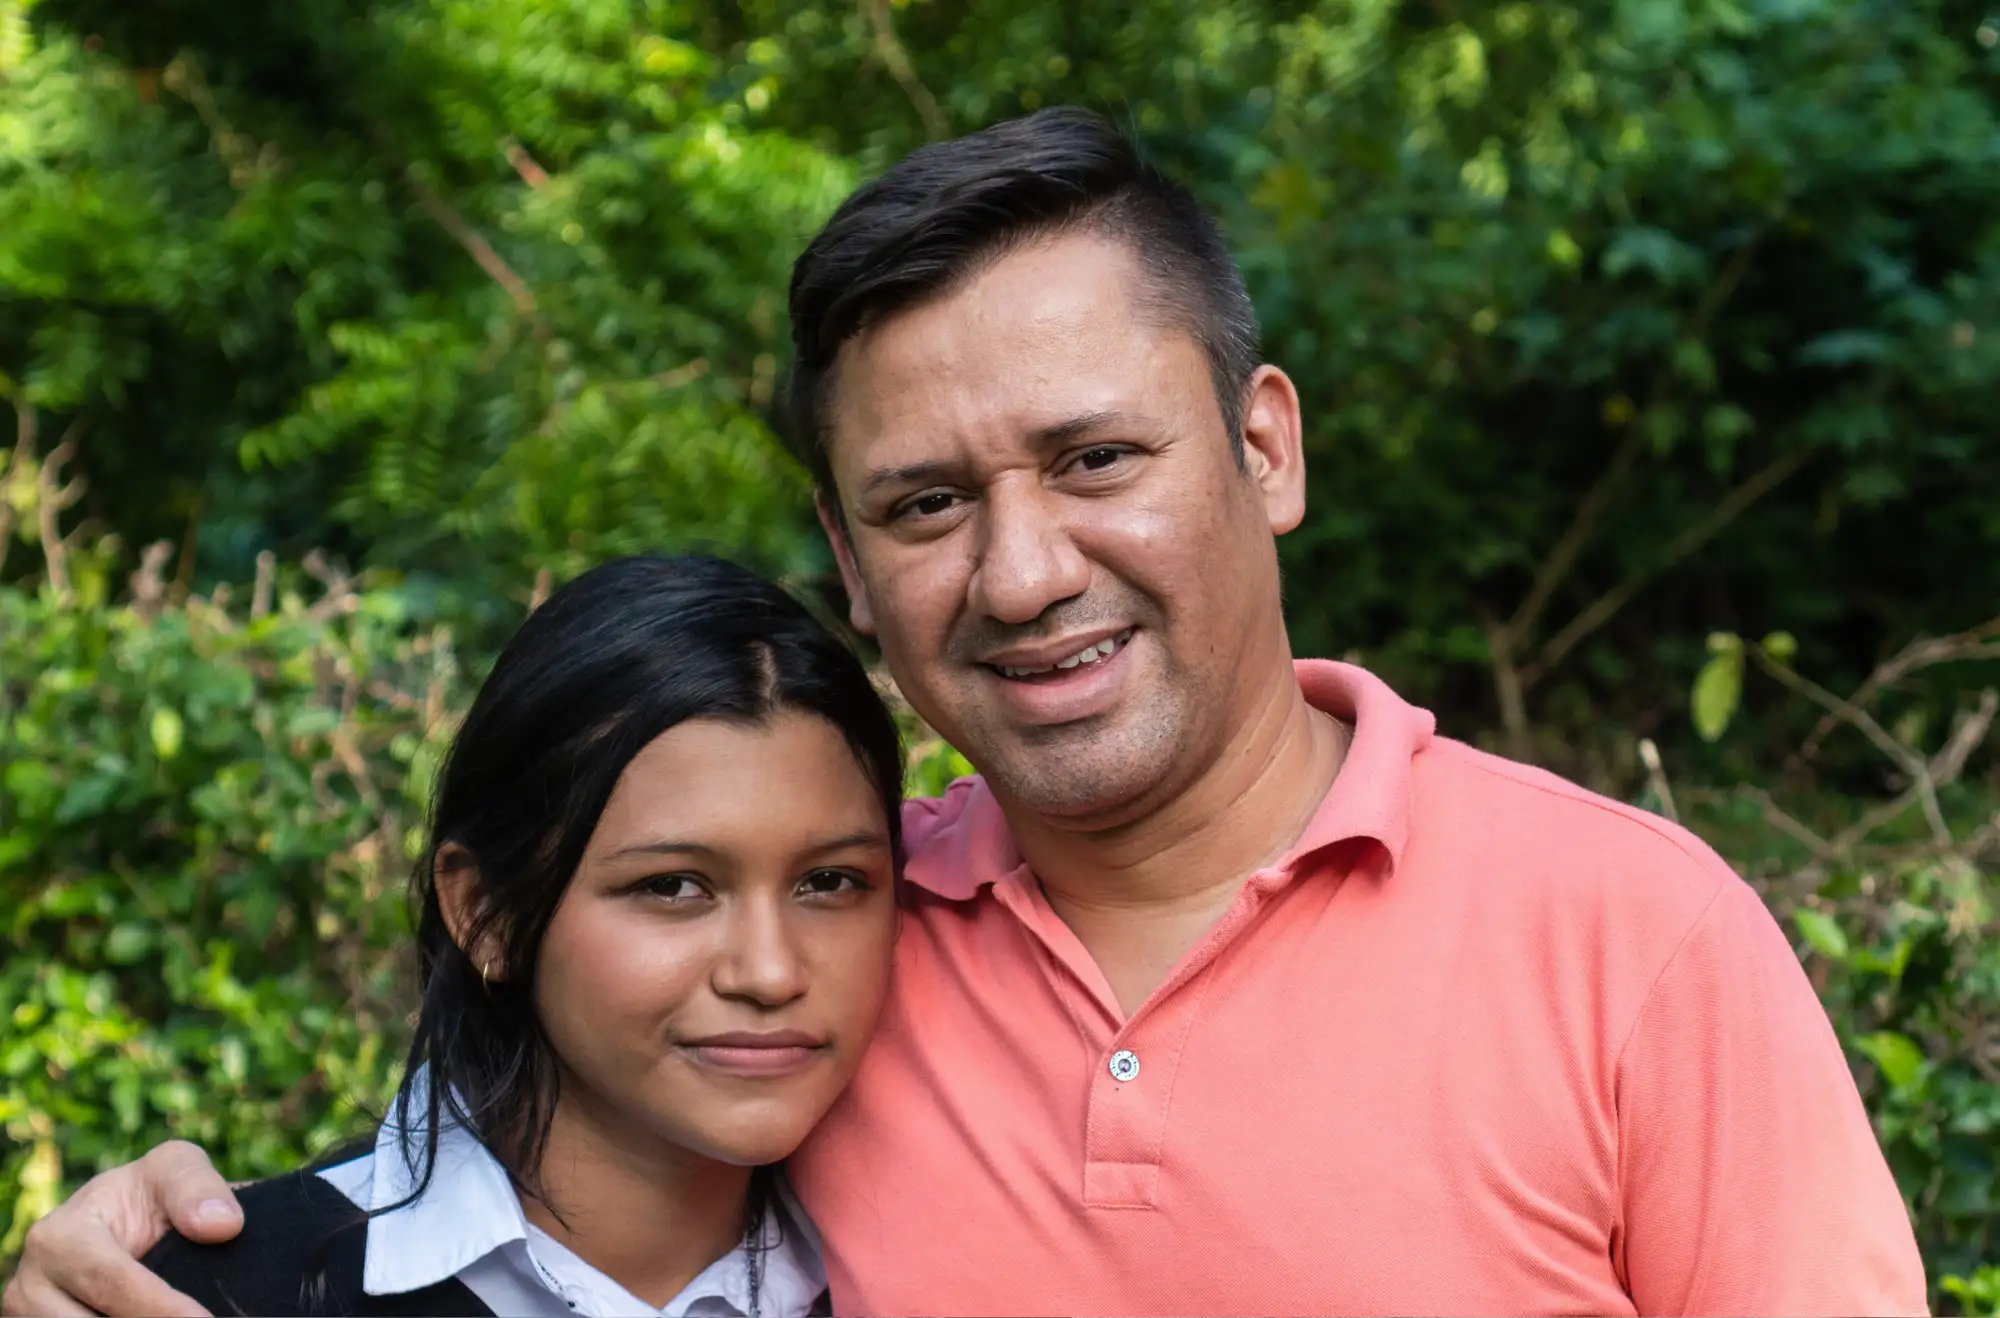 Family Education supported Joel to improve his relationship with his daughters